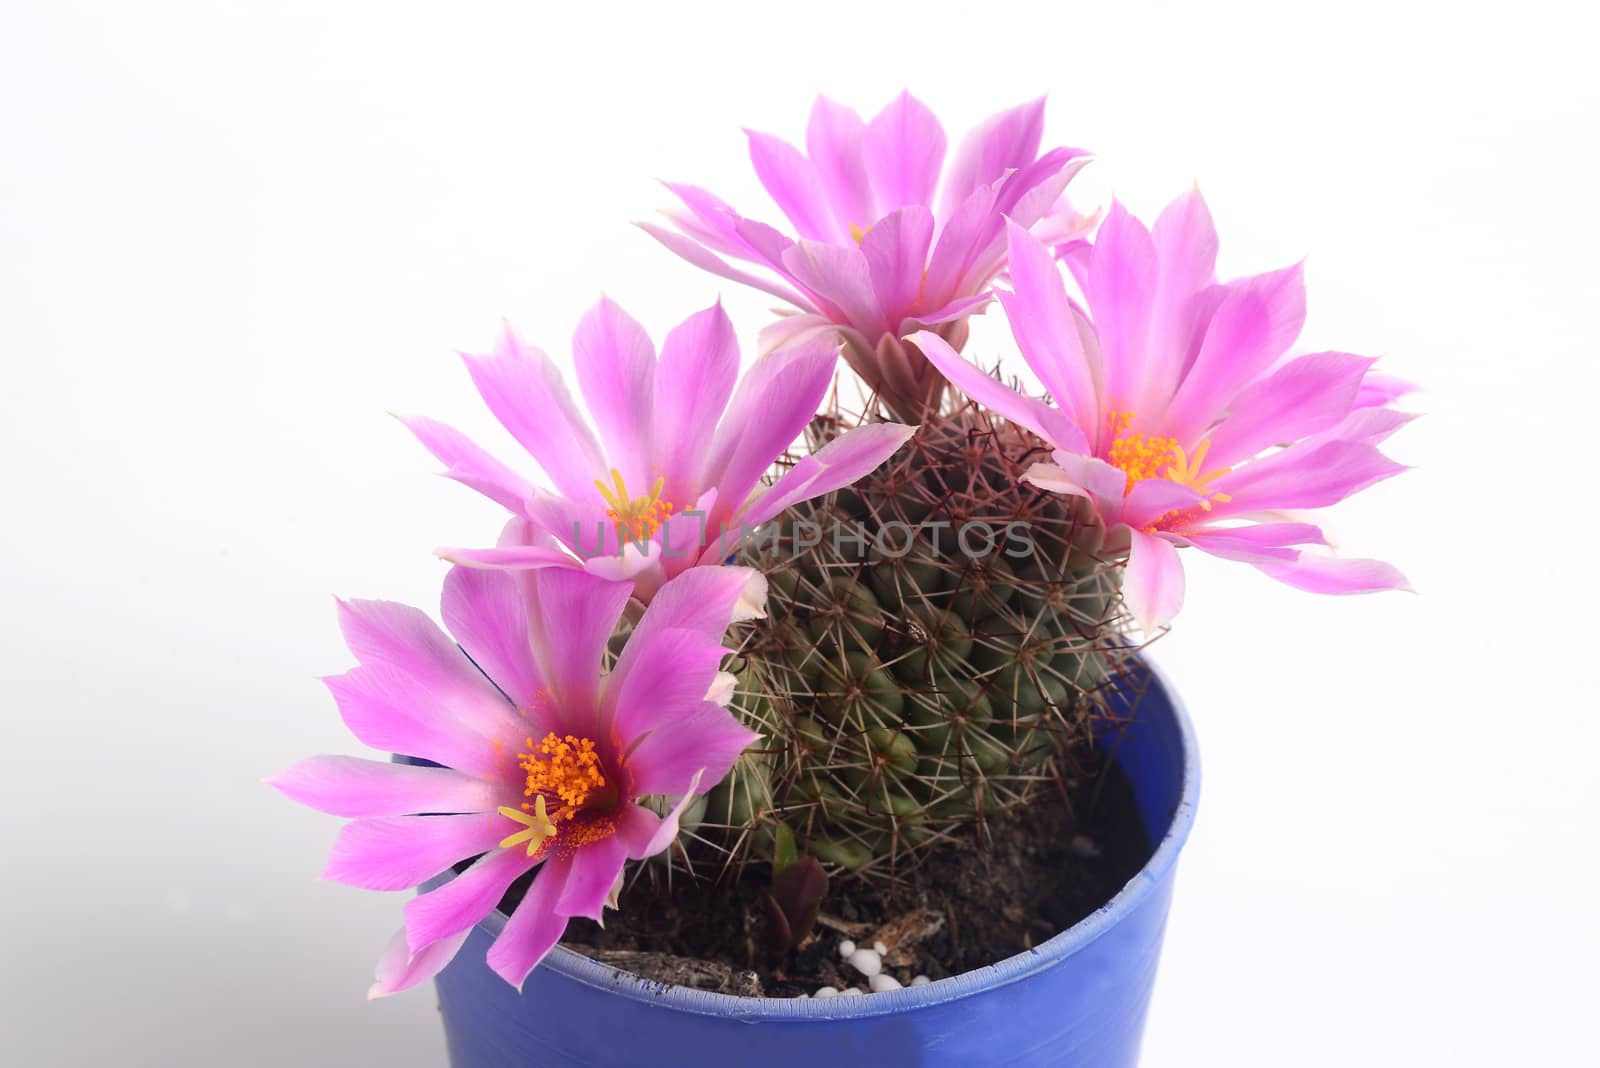 Blooming pink  flower of Mammillaria schumannii  cactus on  white  background with copy space for text